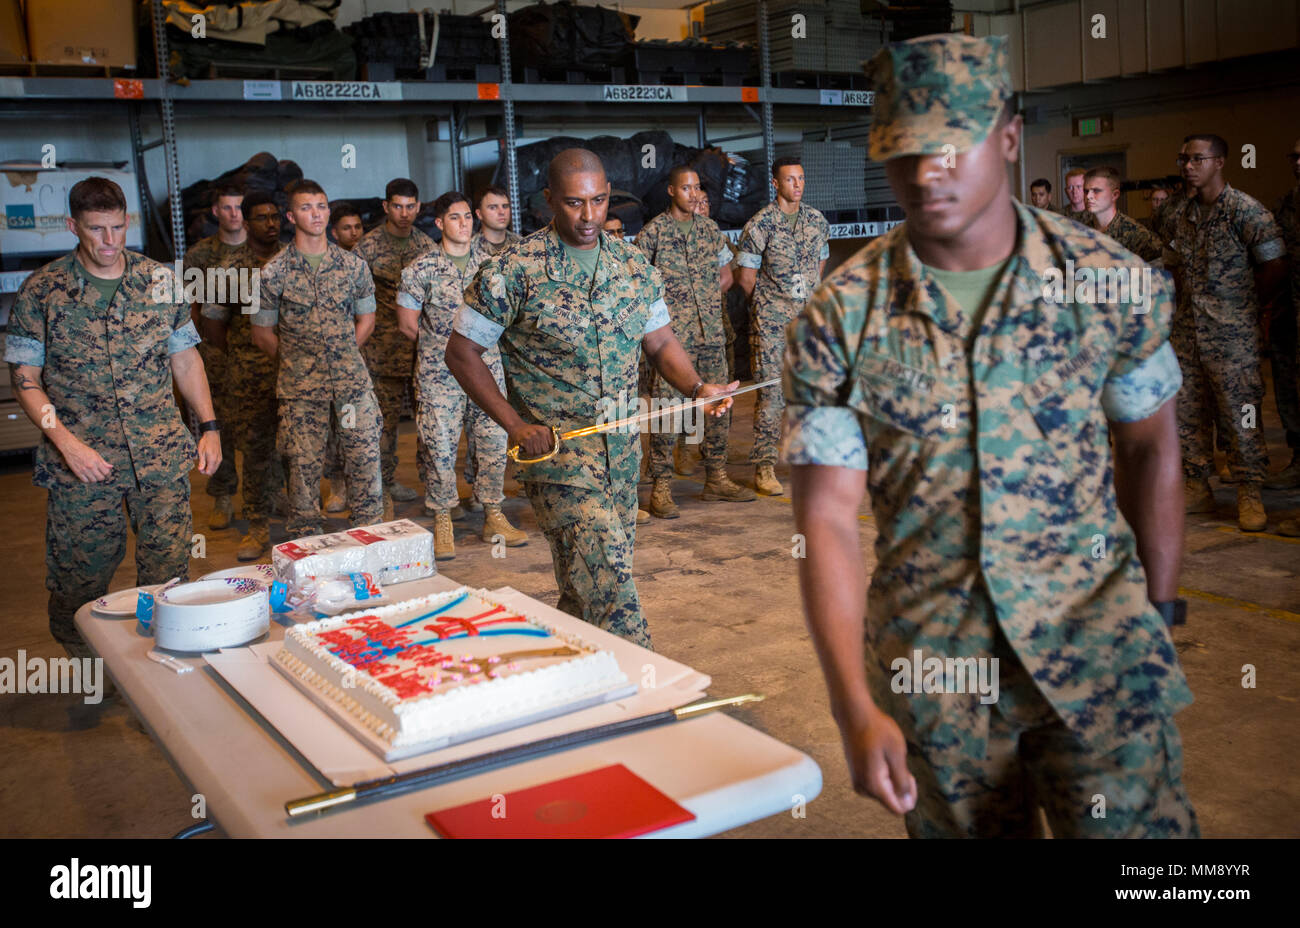 Lt. Col. Harold E. Dowling, Marine Tactical Air Command Squadron 18 commanding officer, prepares to cut the cake during the 50th anniversary celebration of MTACS-18 at Marine Corps Air Station Futenma, September 15, 2017. During the ceremony, Marines read excerpts about the courageous efforts put forth by MTACS-18. The squadron was activated on September 1, 1967 at Da Nang, Republic of Vietnam, as Headquarters and Headquarters Squadron 18, Marine Air Control Group 18, 1st Marine Aircraft Wing. (U.S. Marine Corps photo by Lance Cpl. Andy Martinez) Stock Photo